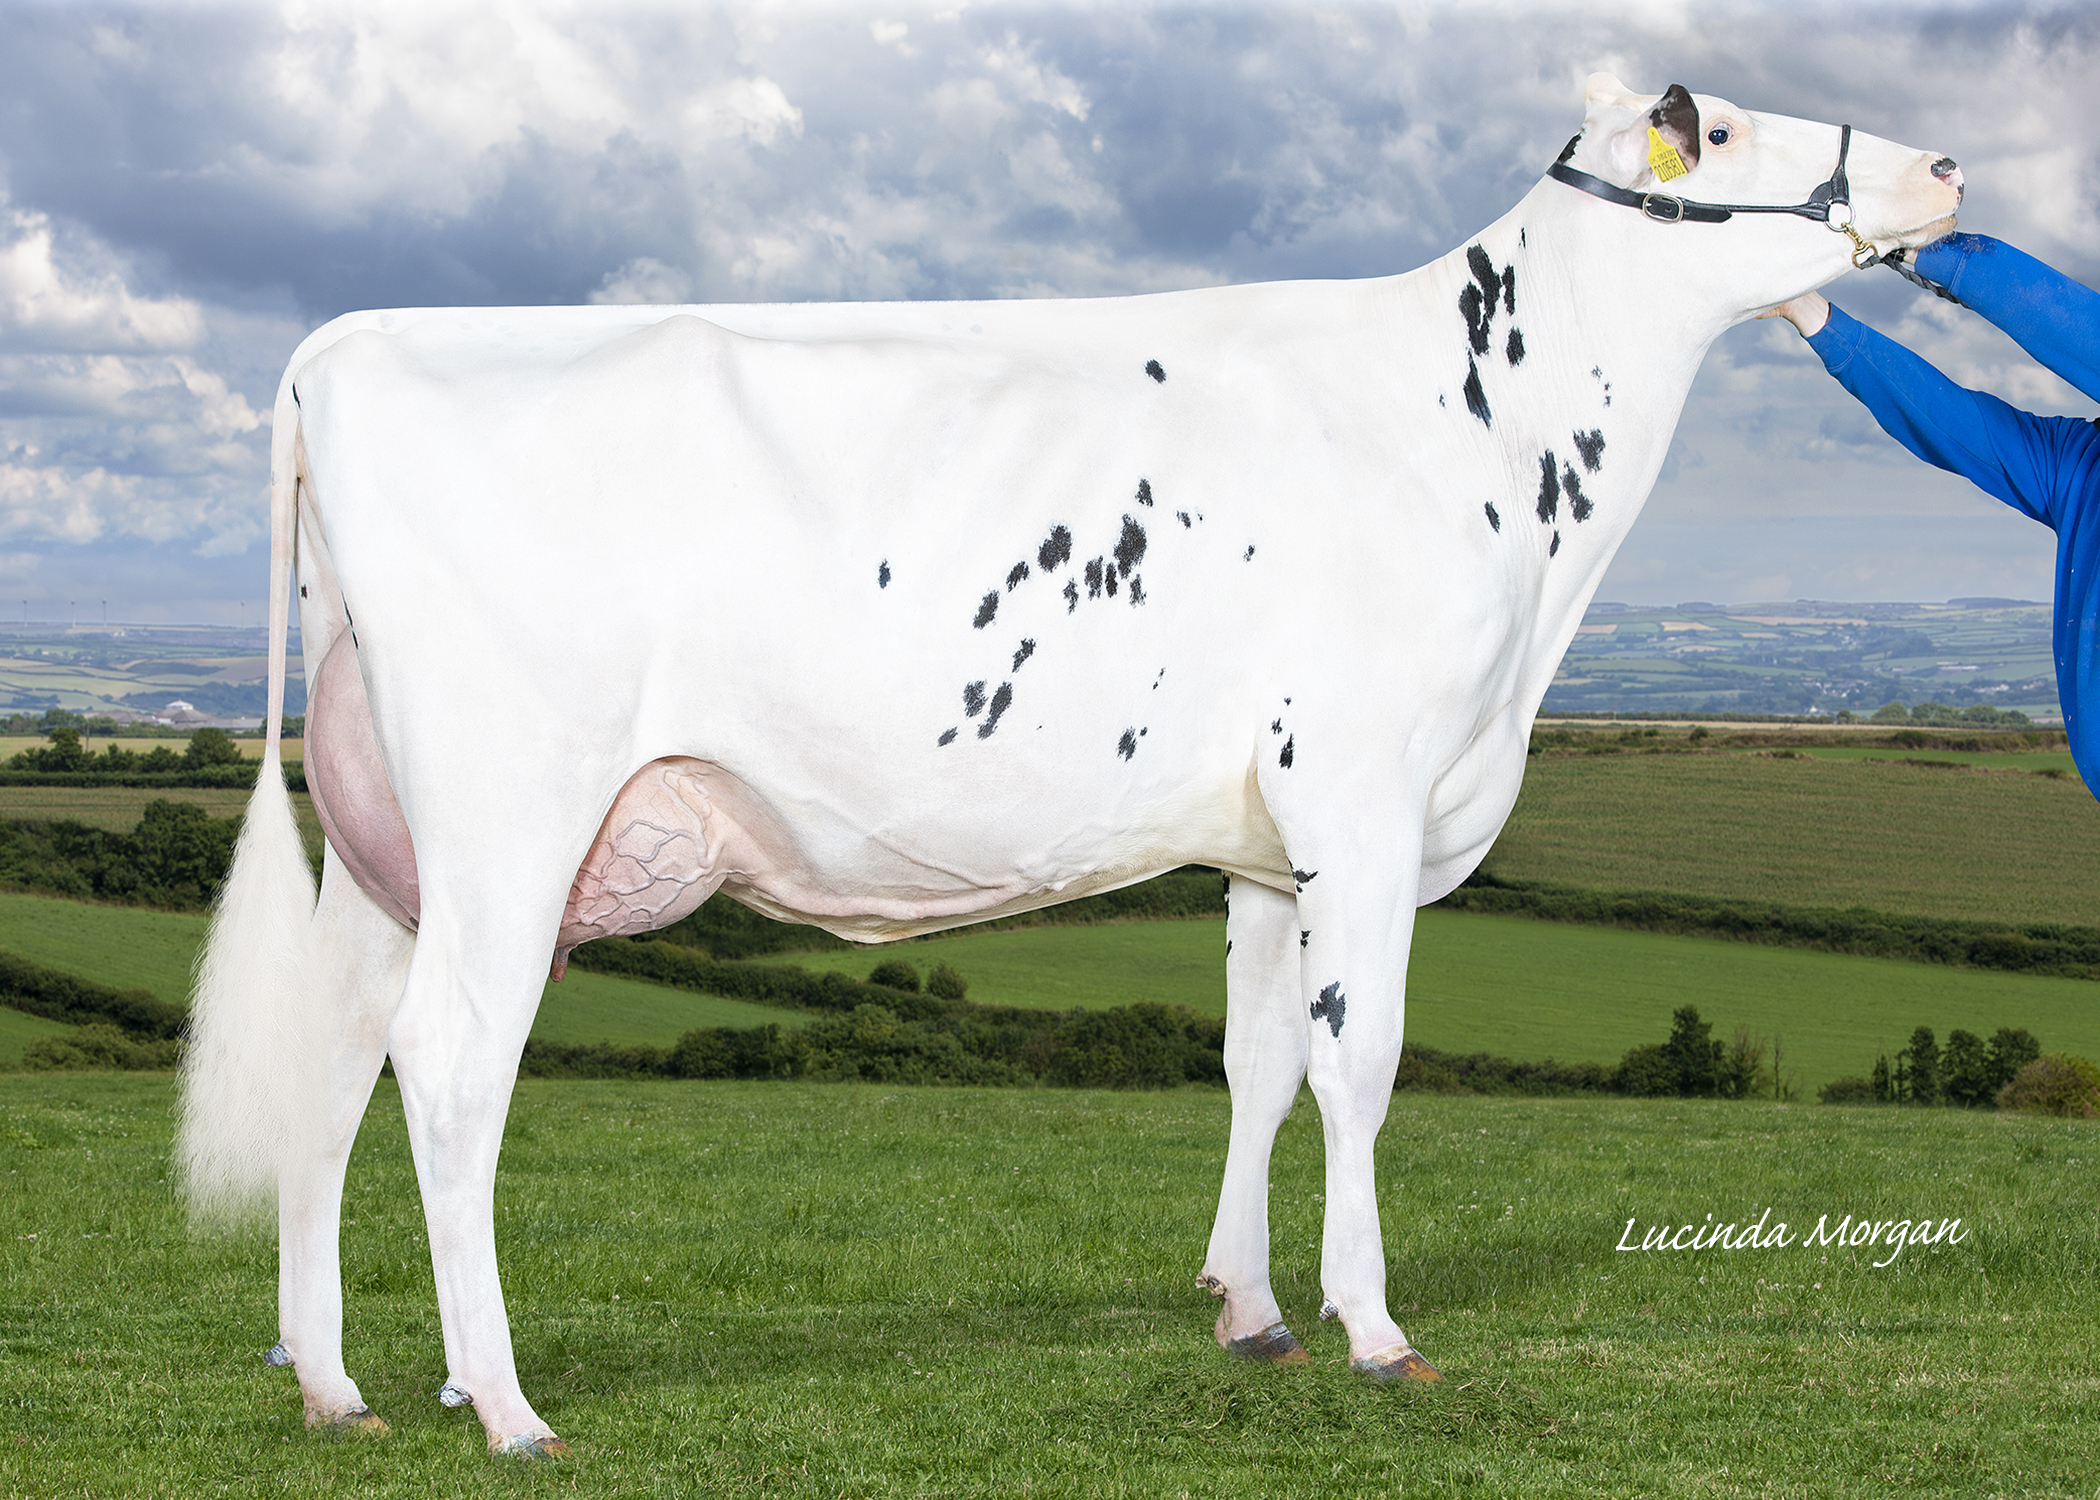 Willsbro Amoeba Amber 167 made 9000gns selling to James McNeil, Cairnpat